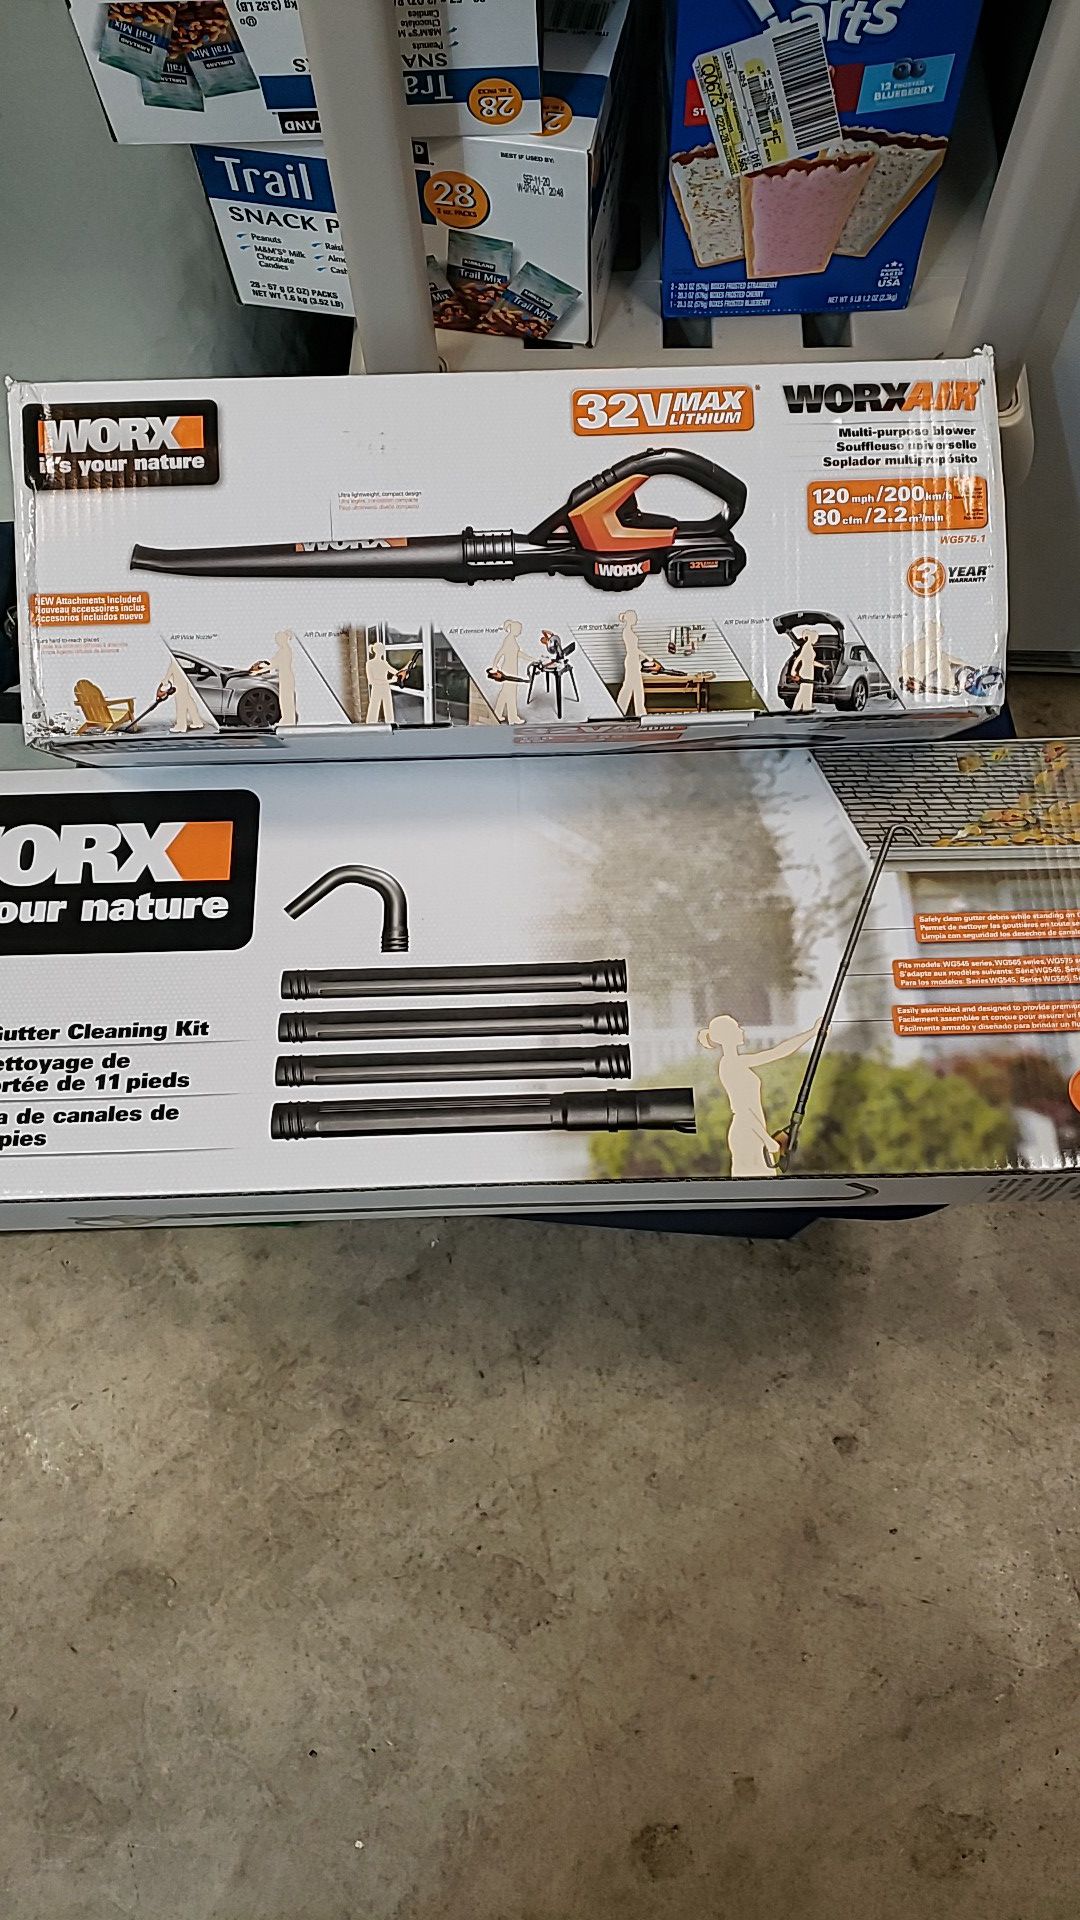 Worx blower and gutter cleaning kit